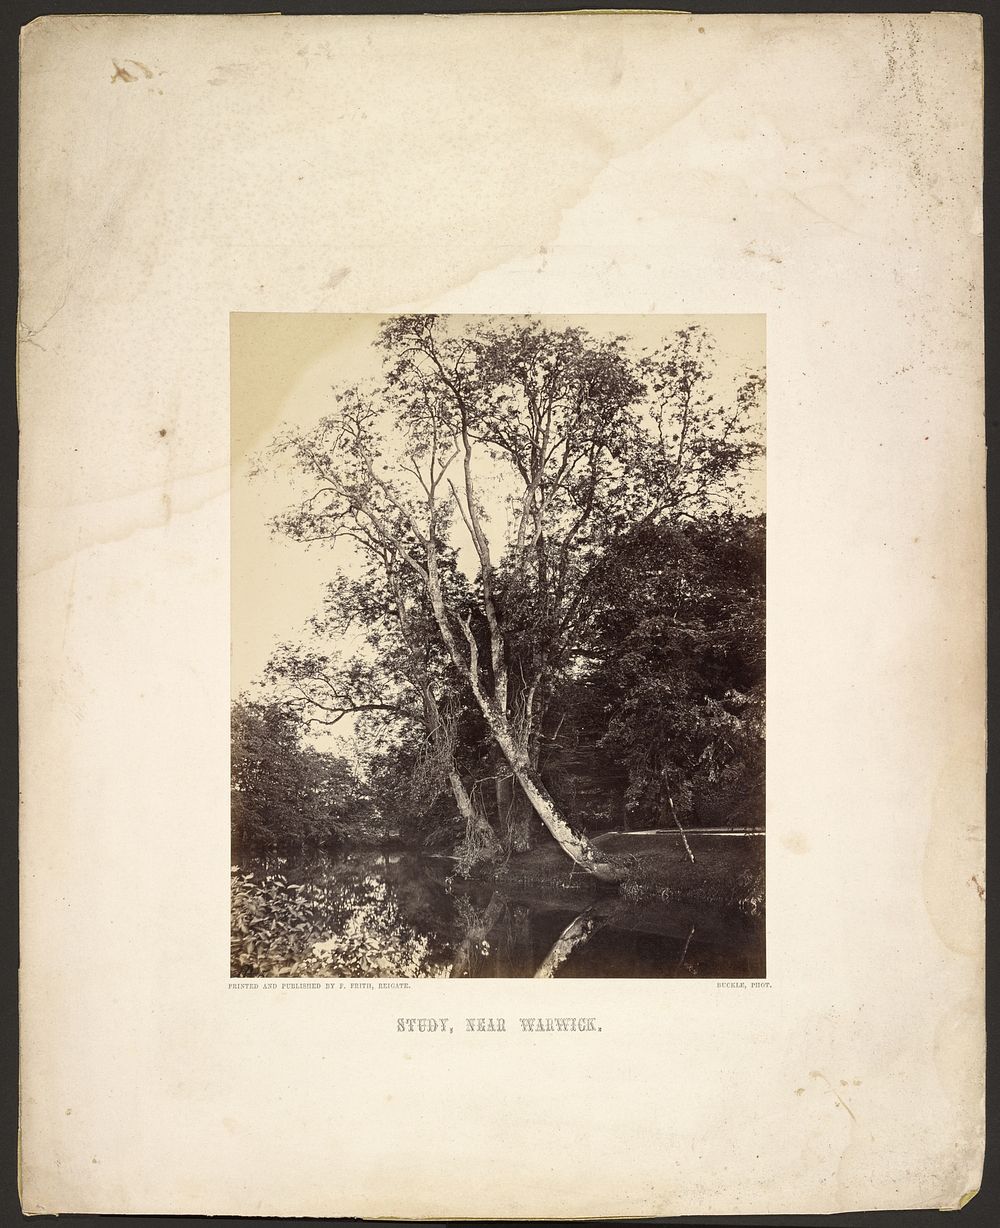 Study, Near Warwick. by Samuel Buckle and Francis Frith